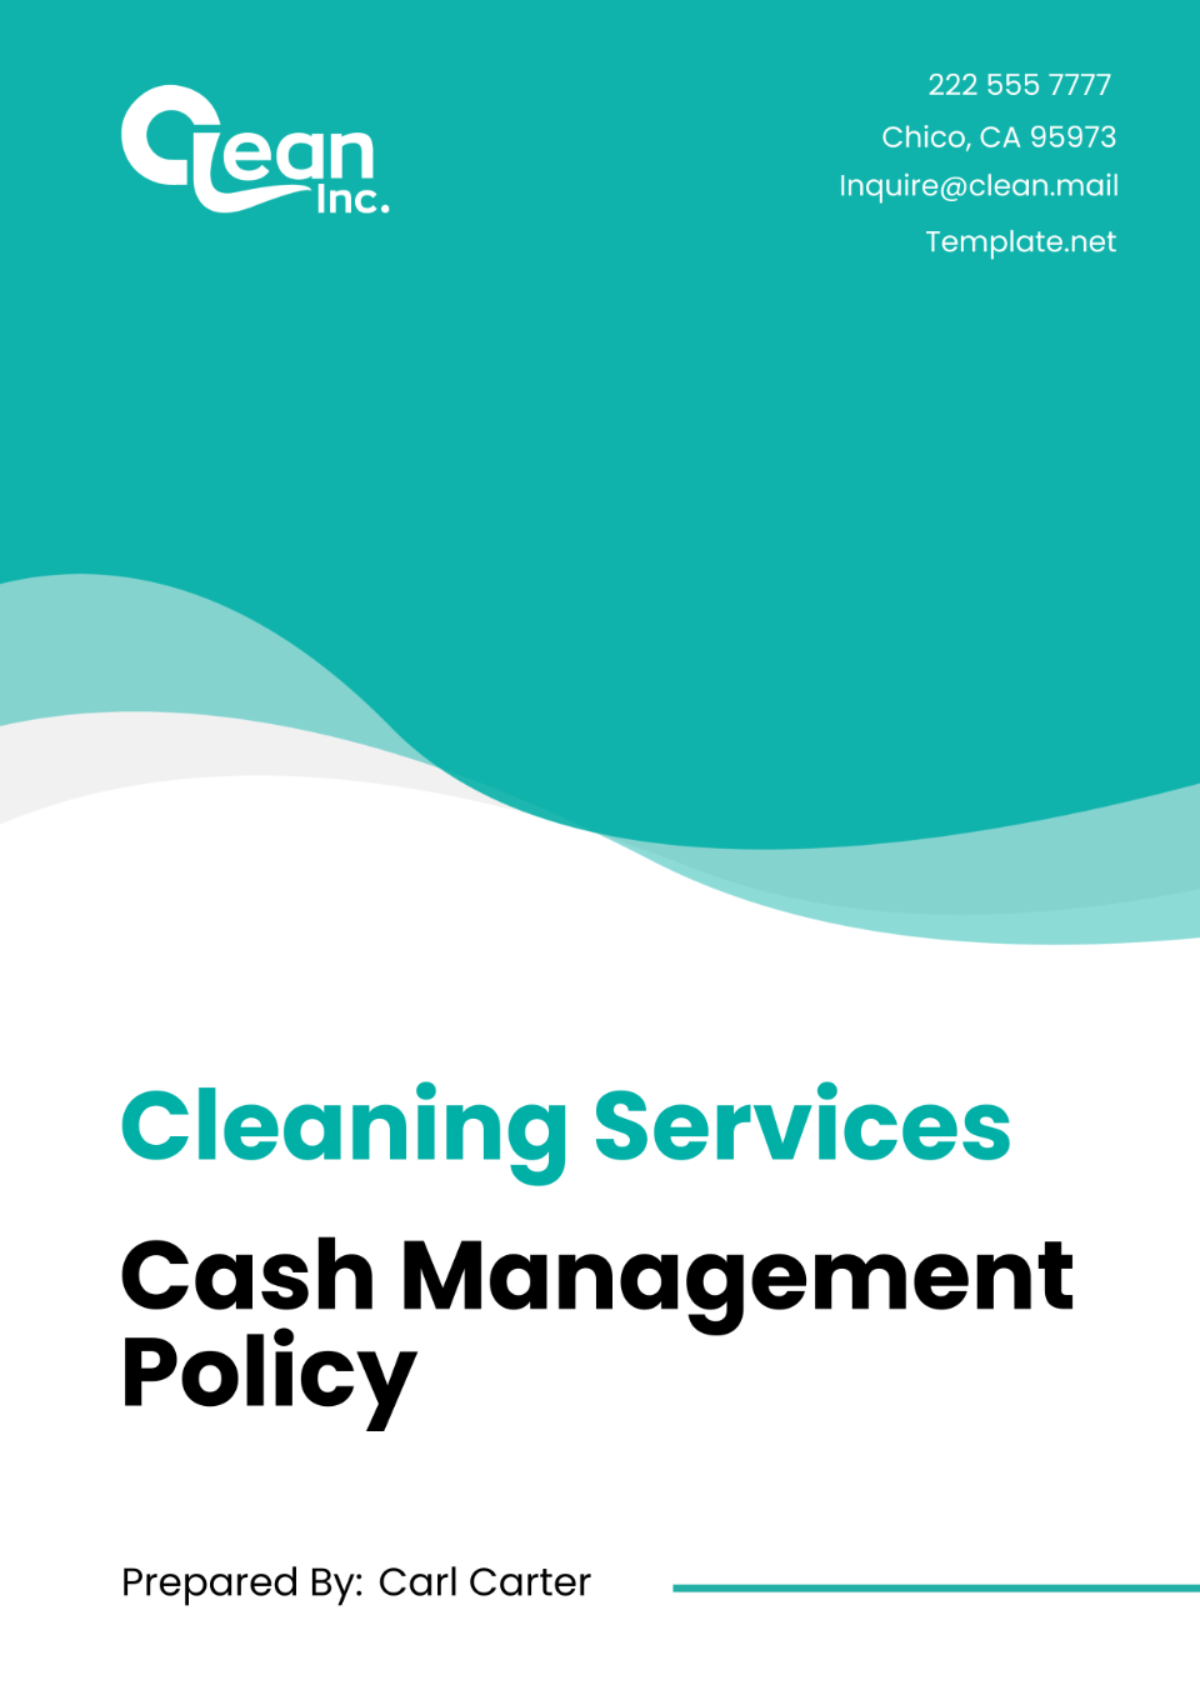 Cleaning Services Cash Management Policy Template